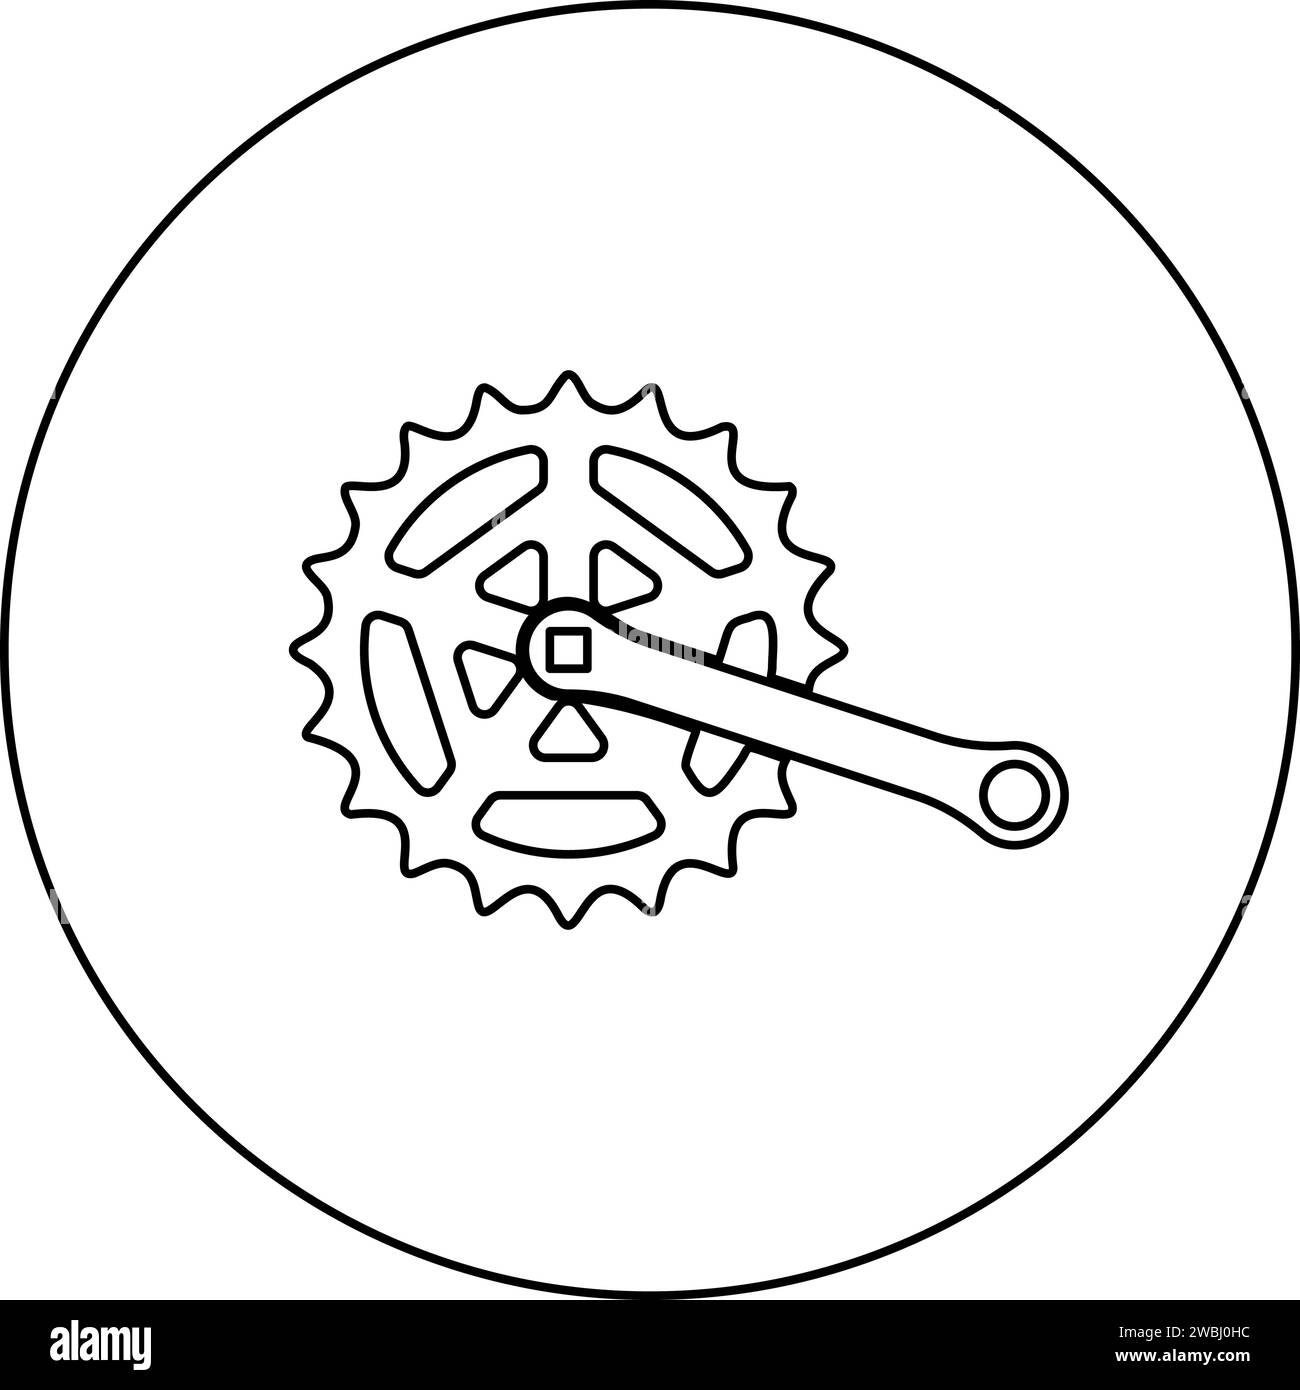 Crankset cogwheel sprocket crank length with gear for bicycle cassette system bike icon in circle round black color vector illustration image outline Stock Vector